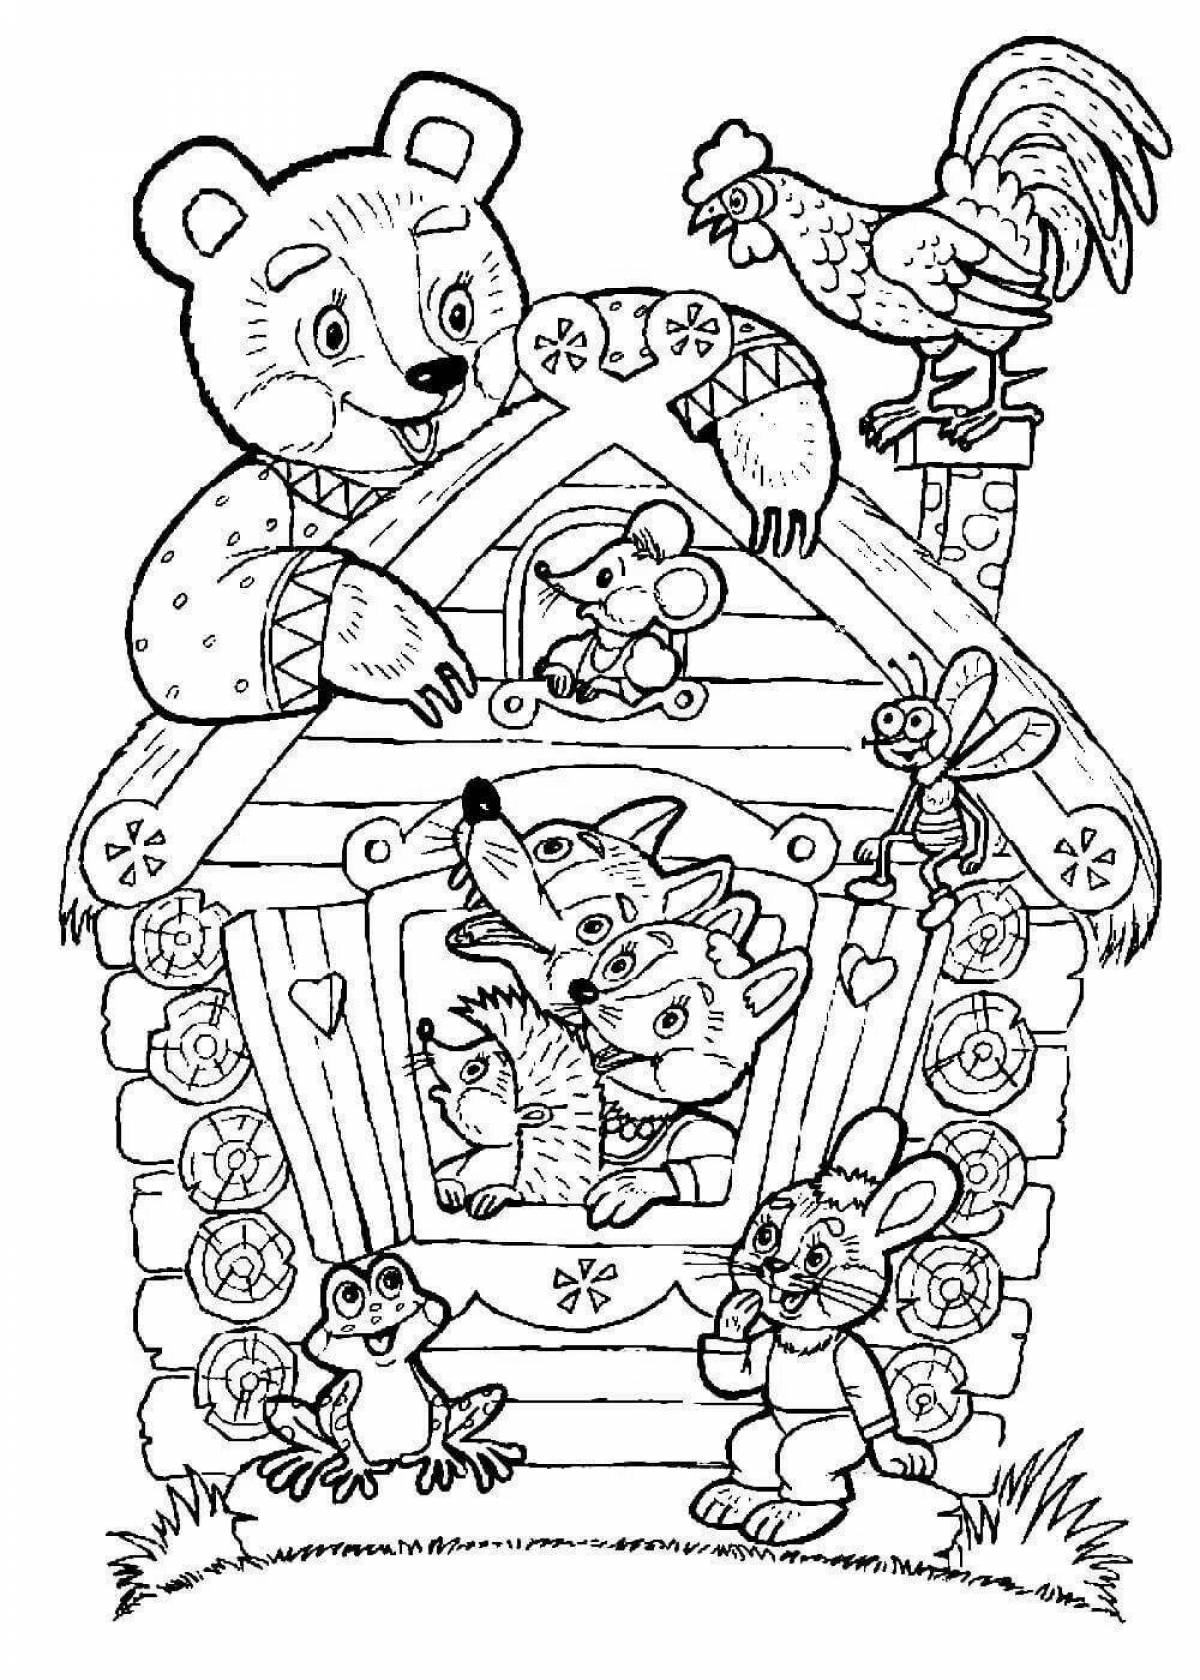 Coloring book based on fairy tales